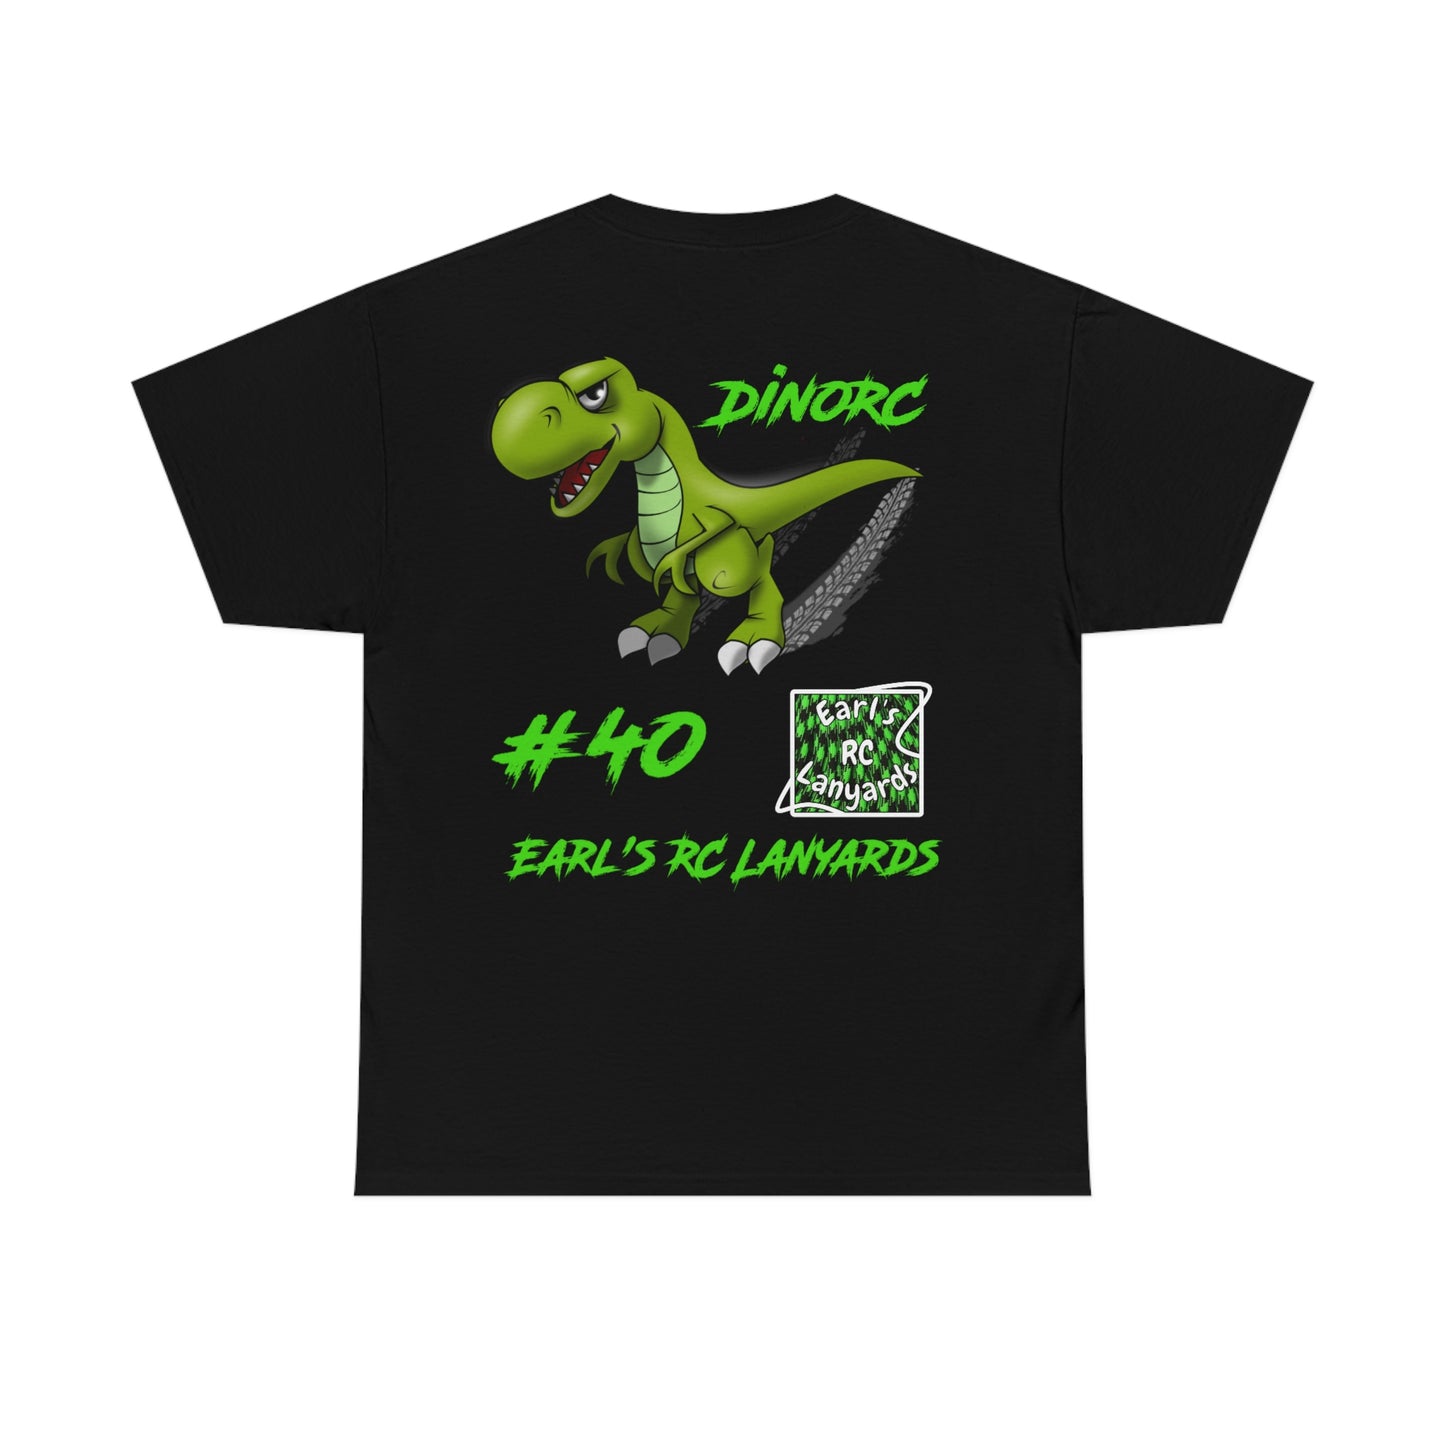 Team Driver Earl's RC Lanyards Front and Back DinoRc Logo T-Shirt S-5x 5 colors